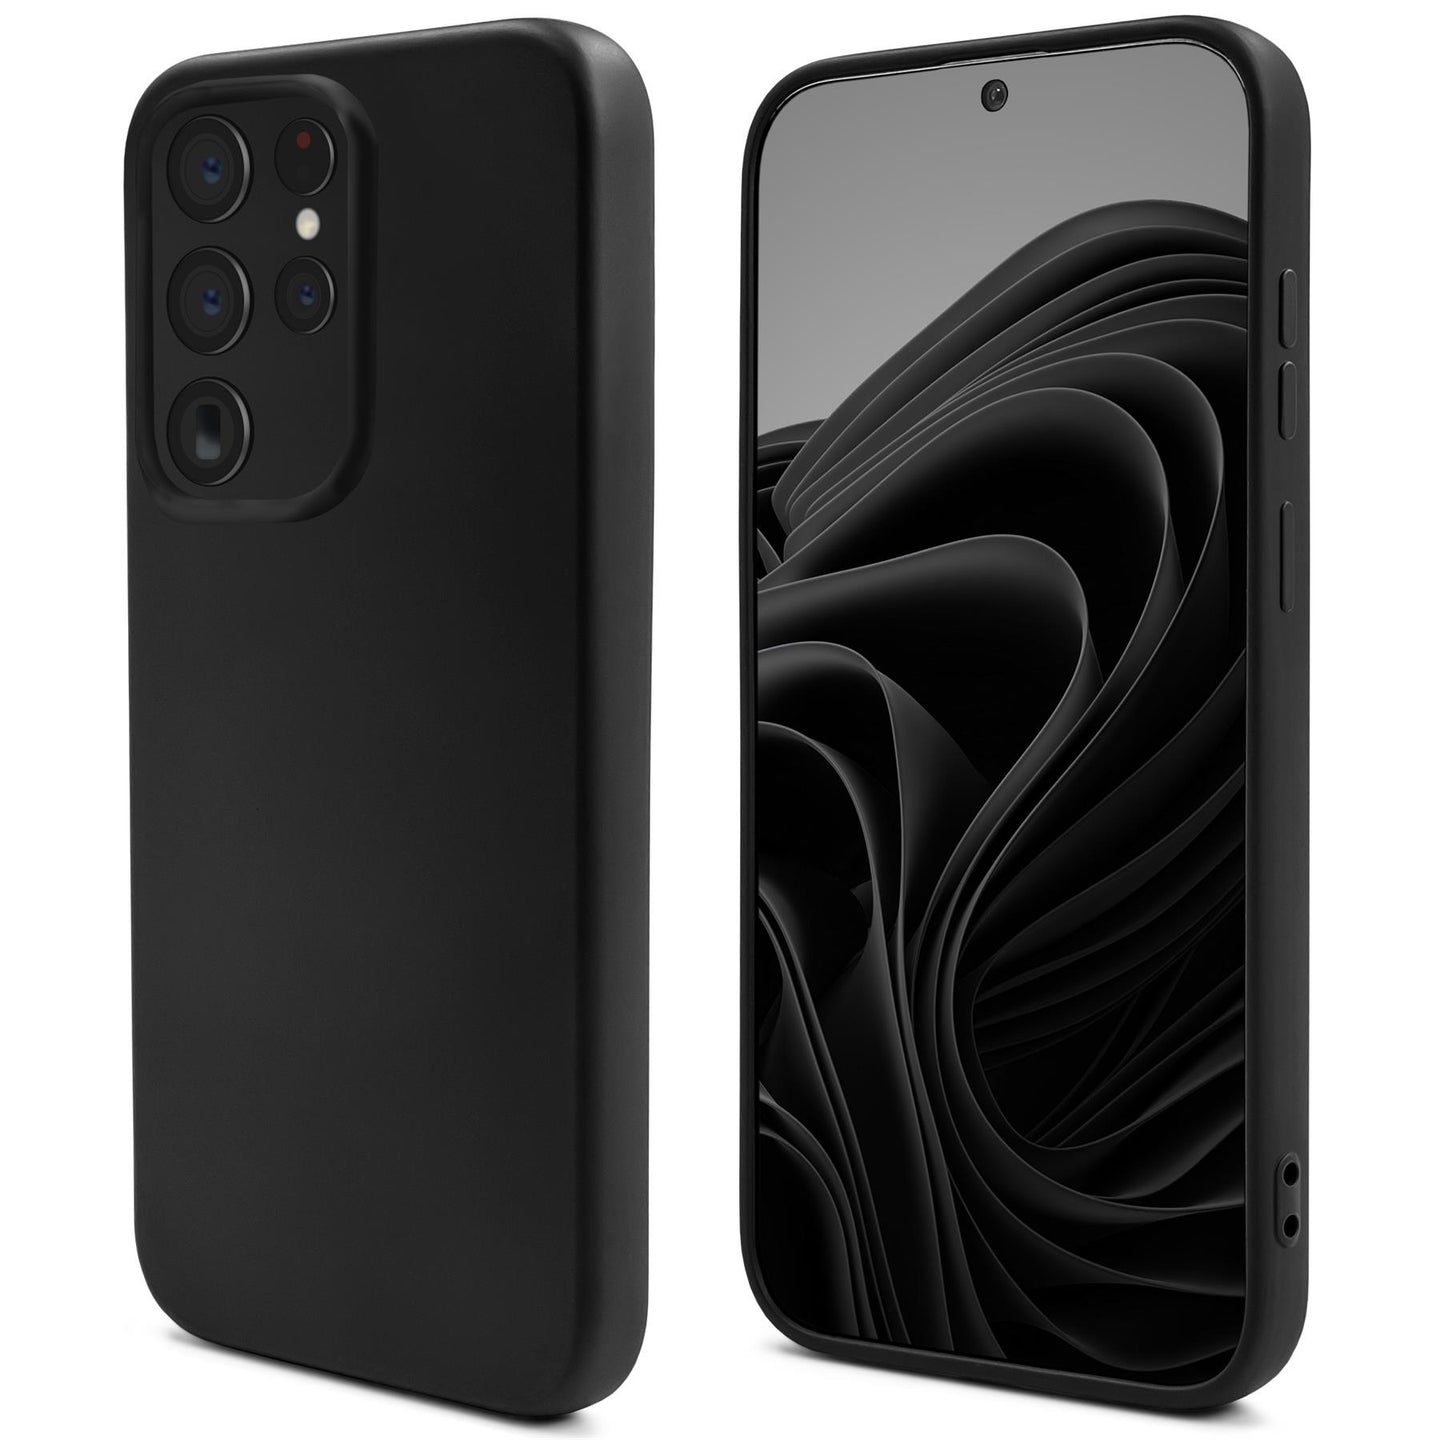 Moozy Lifestyle. Silicone Case for Samsung S22 Ultra, Black - Liquid Silicone Lightweight Cover with Matte Finish and Soft Microfiber Lining, Premium Silicone Case